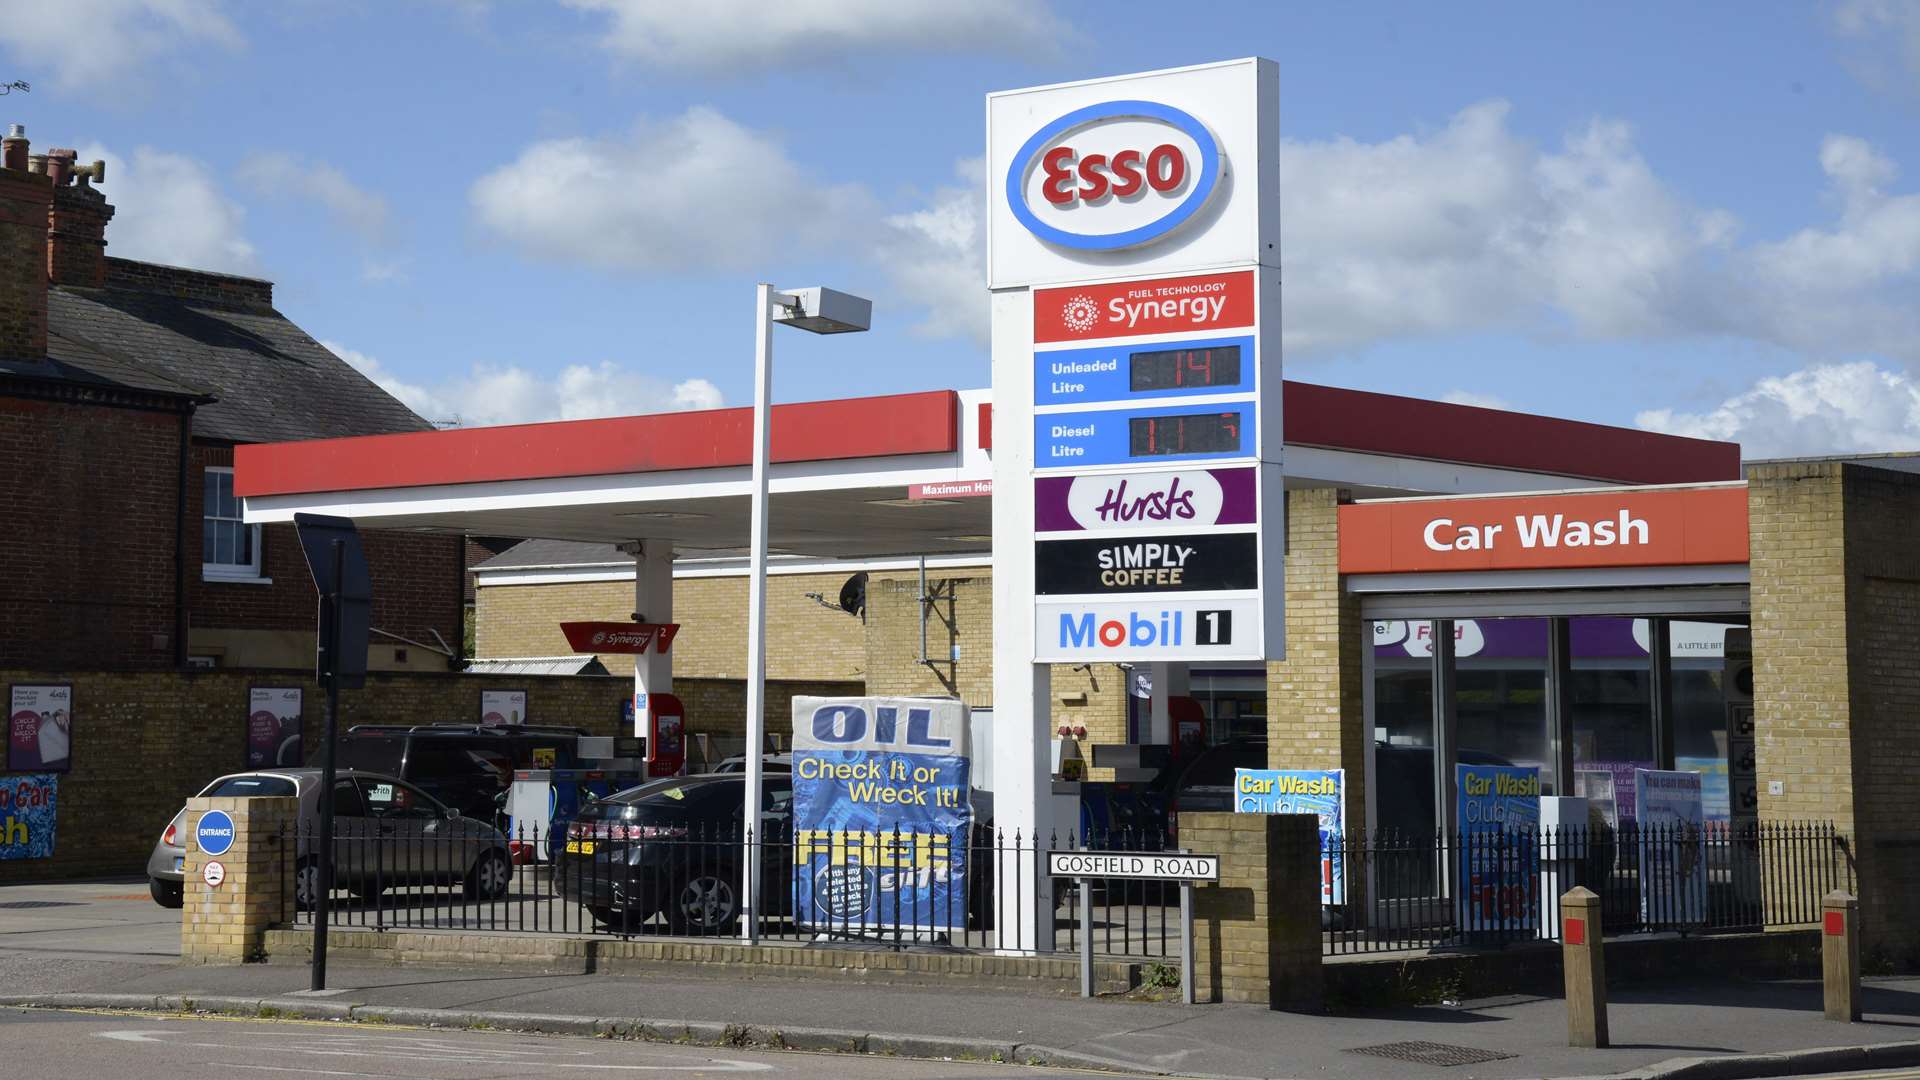 The Esso garage in Herne Bay has come in for widespread criticism on Facebook